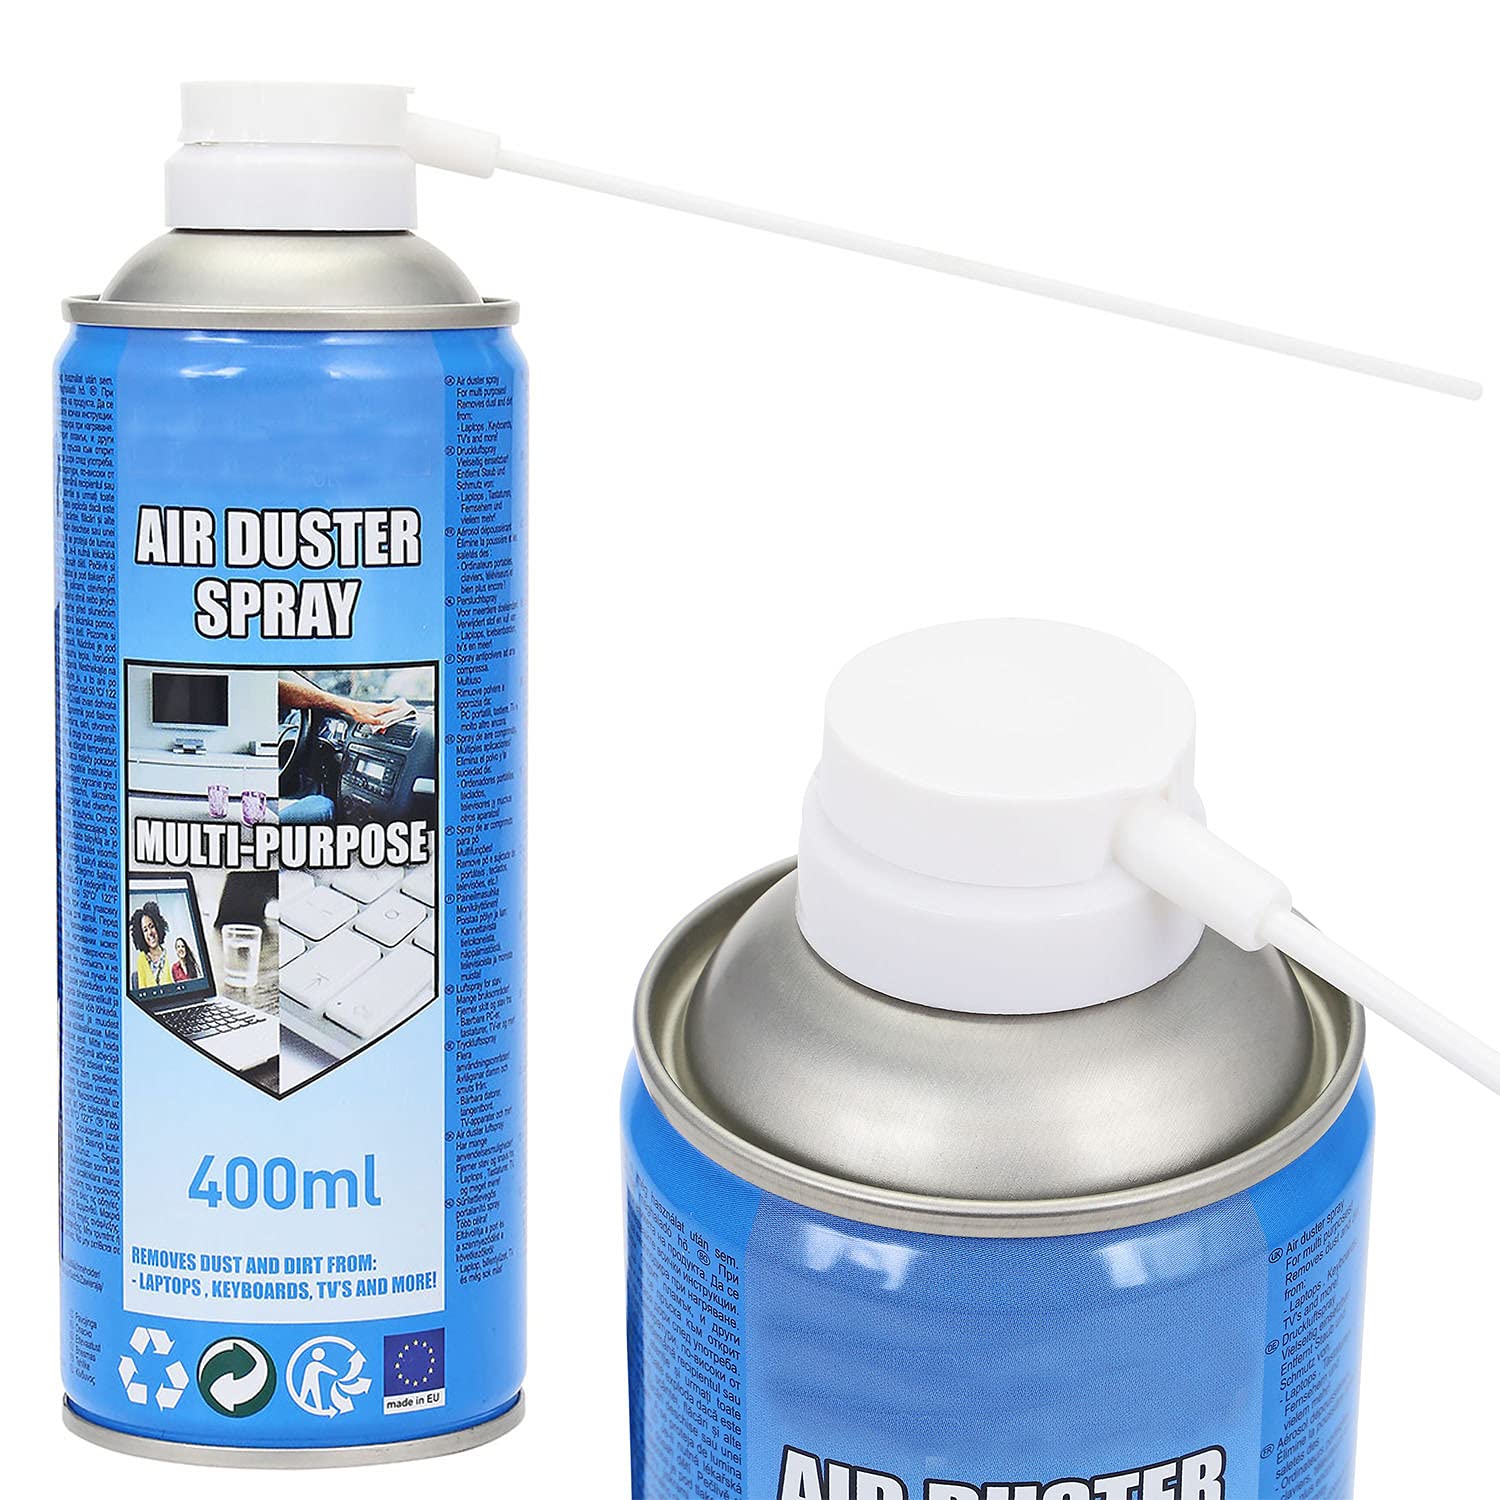 Is air duster (canned air) safe on my computer and other electronics?